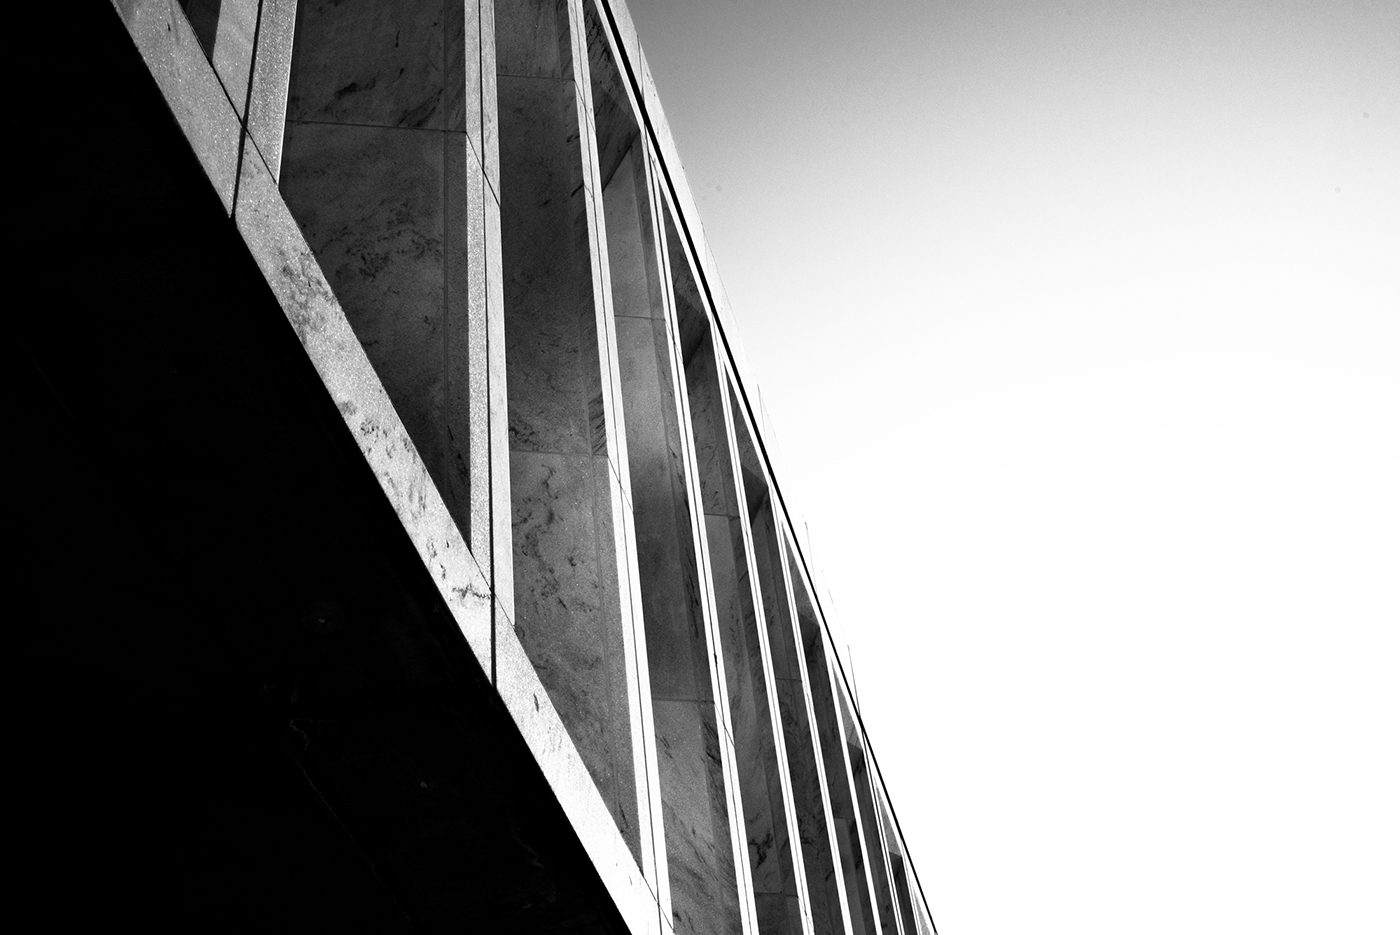 architecture lightroom adrianoINK adriano rodrigues black and white Photography  buildings grayscale albany ny Empire State Plaza